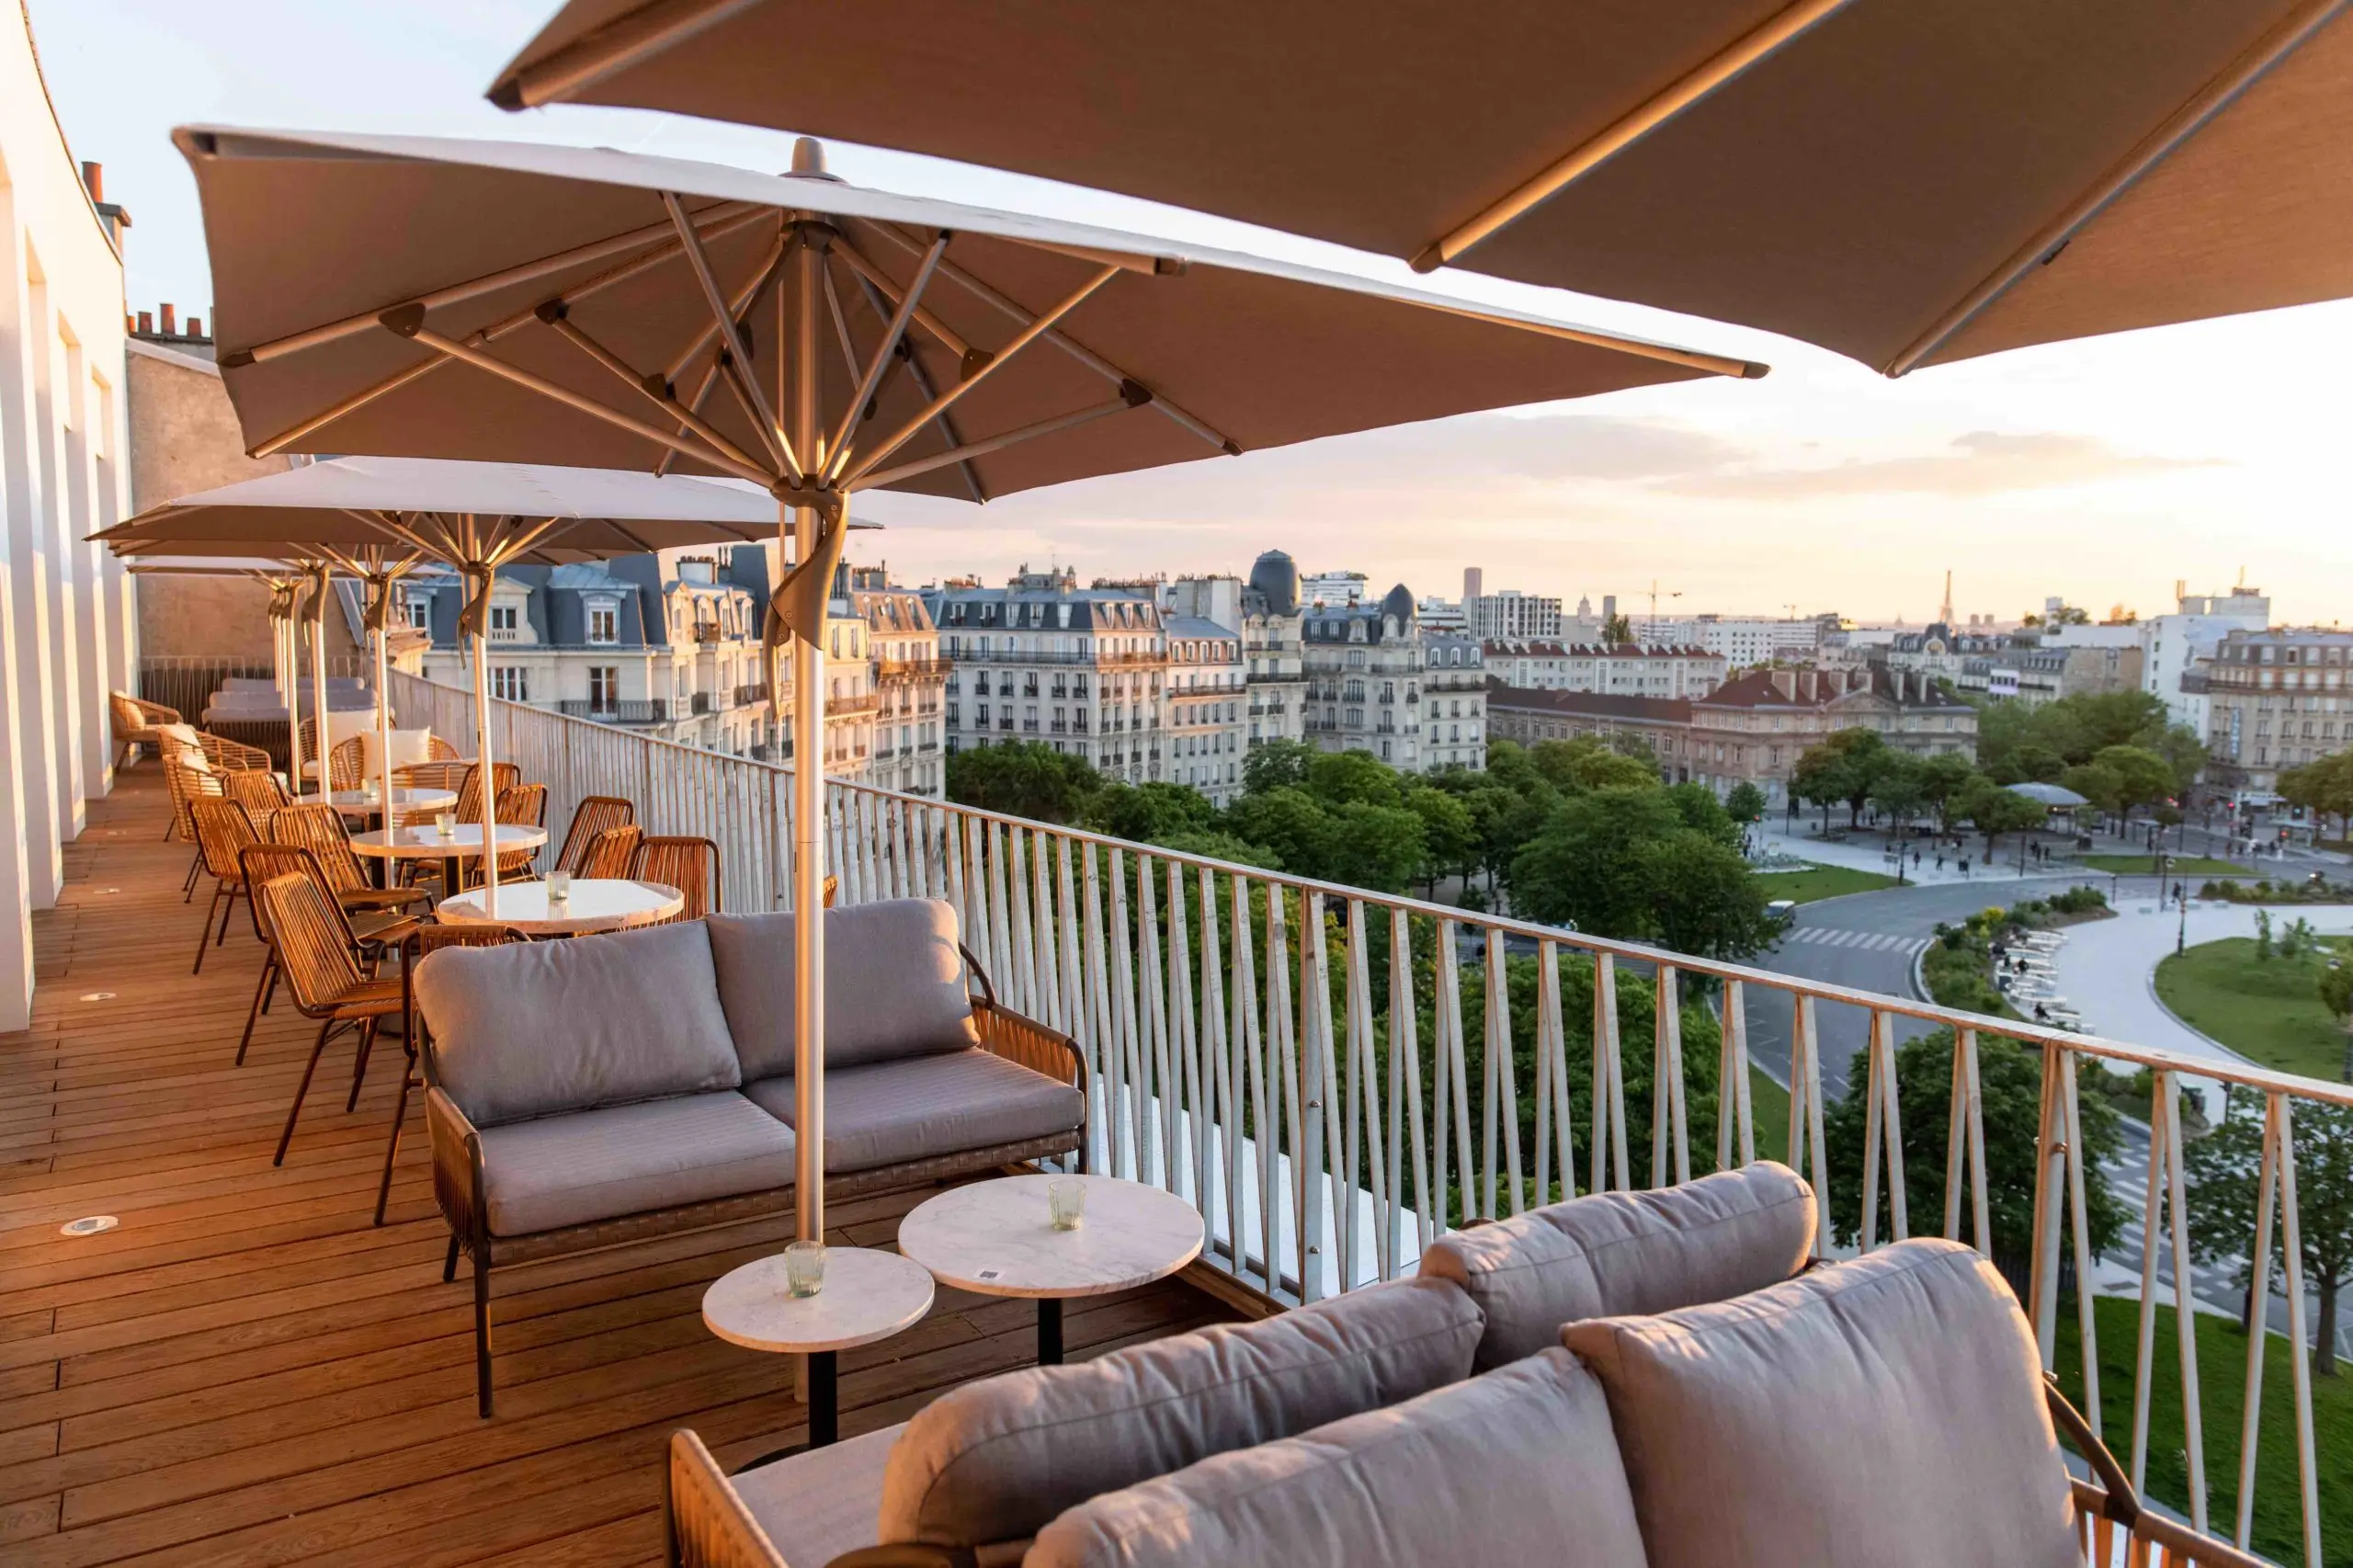 View from The People - Paris Nation, one of the eco-friendly hotels in Paris featuring a serene rooftop terrace with plush seating, wooden tables, and large umbrellas, overlooking a picturesque Parisian cityscape at dusk.